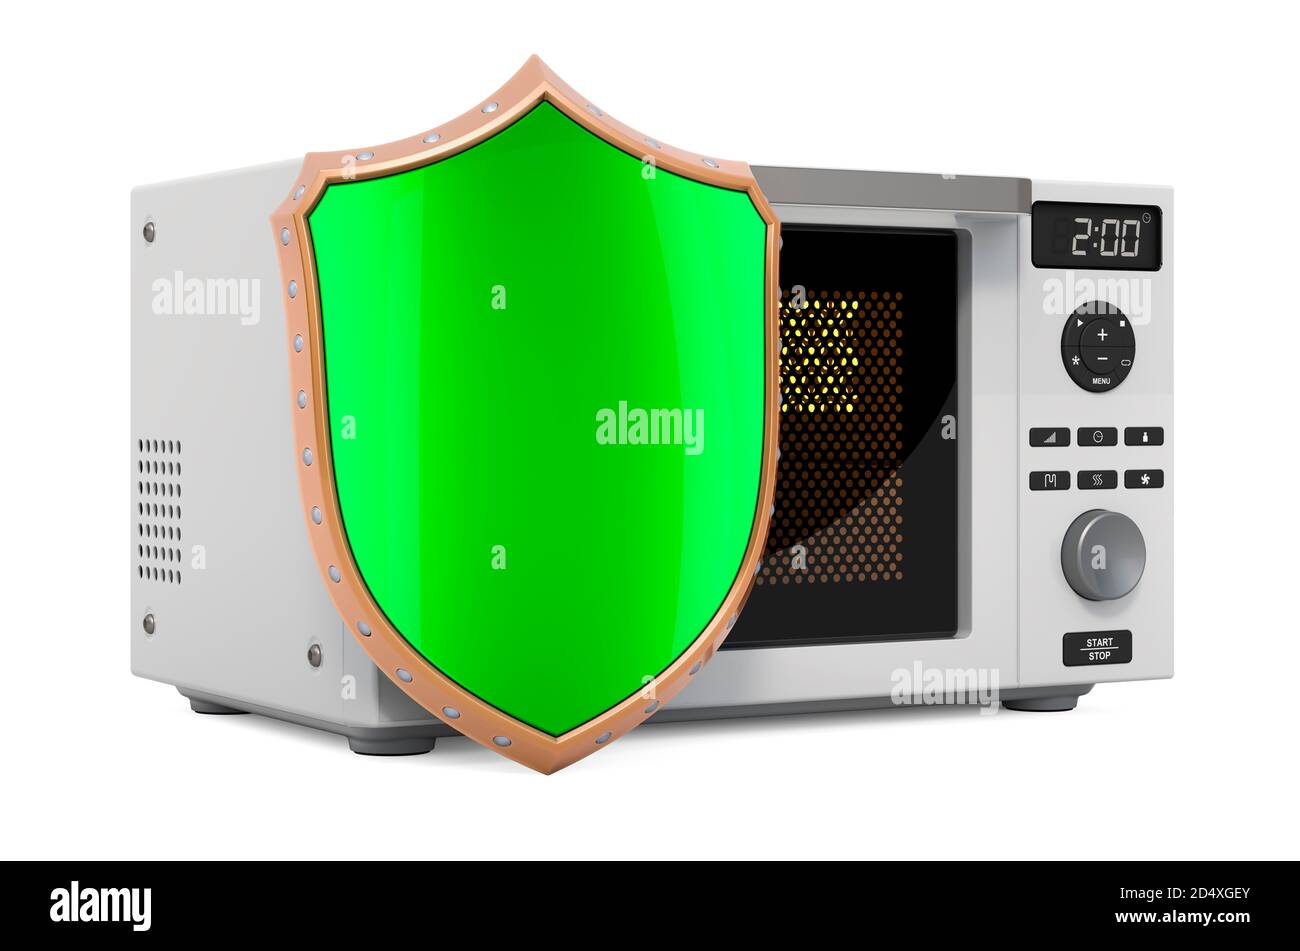 Microwave oven with shield. Guarantee and protection combination oven concept. 3D rendering isolated on white background Stock Photo